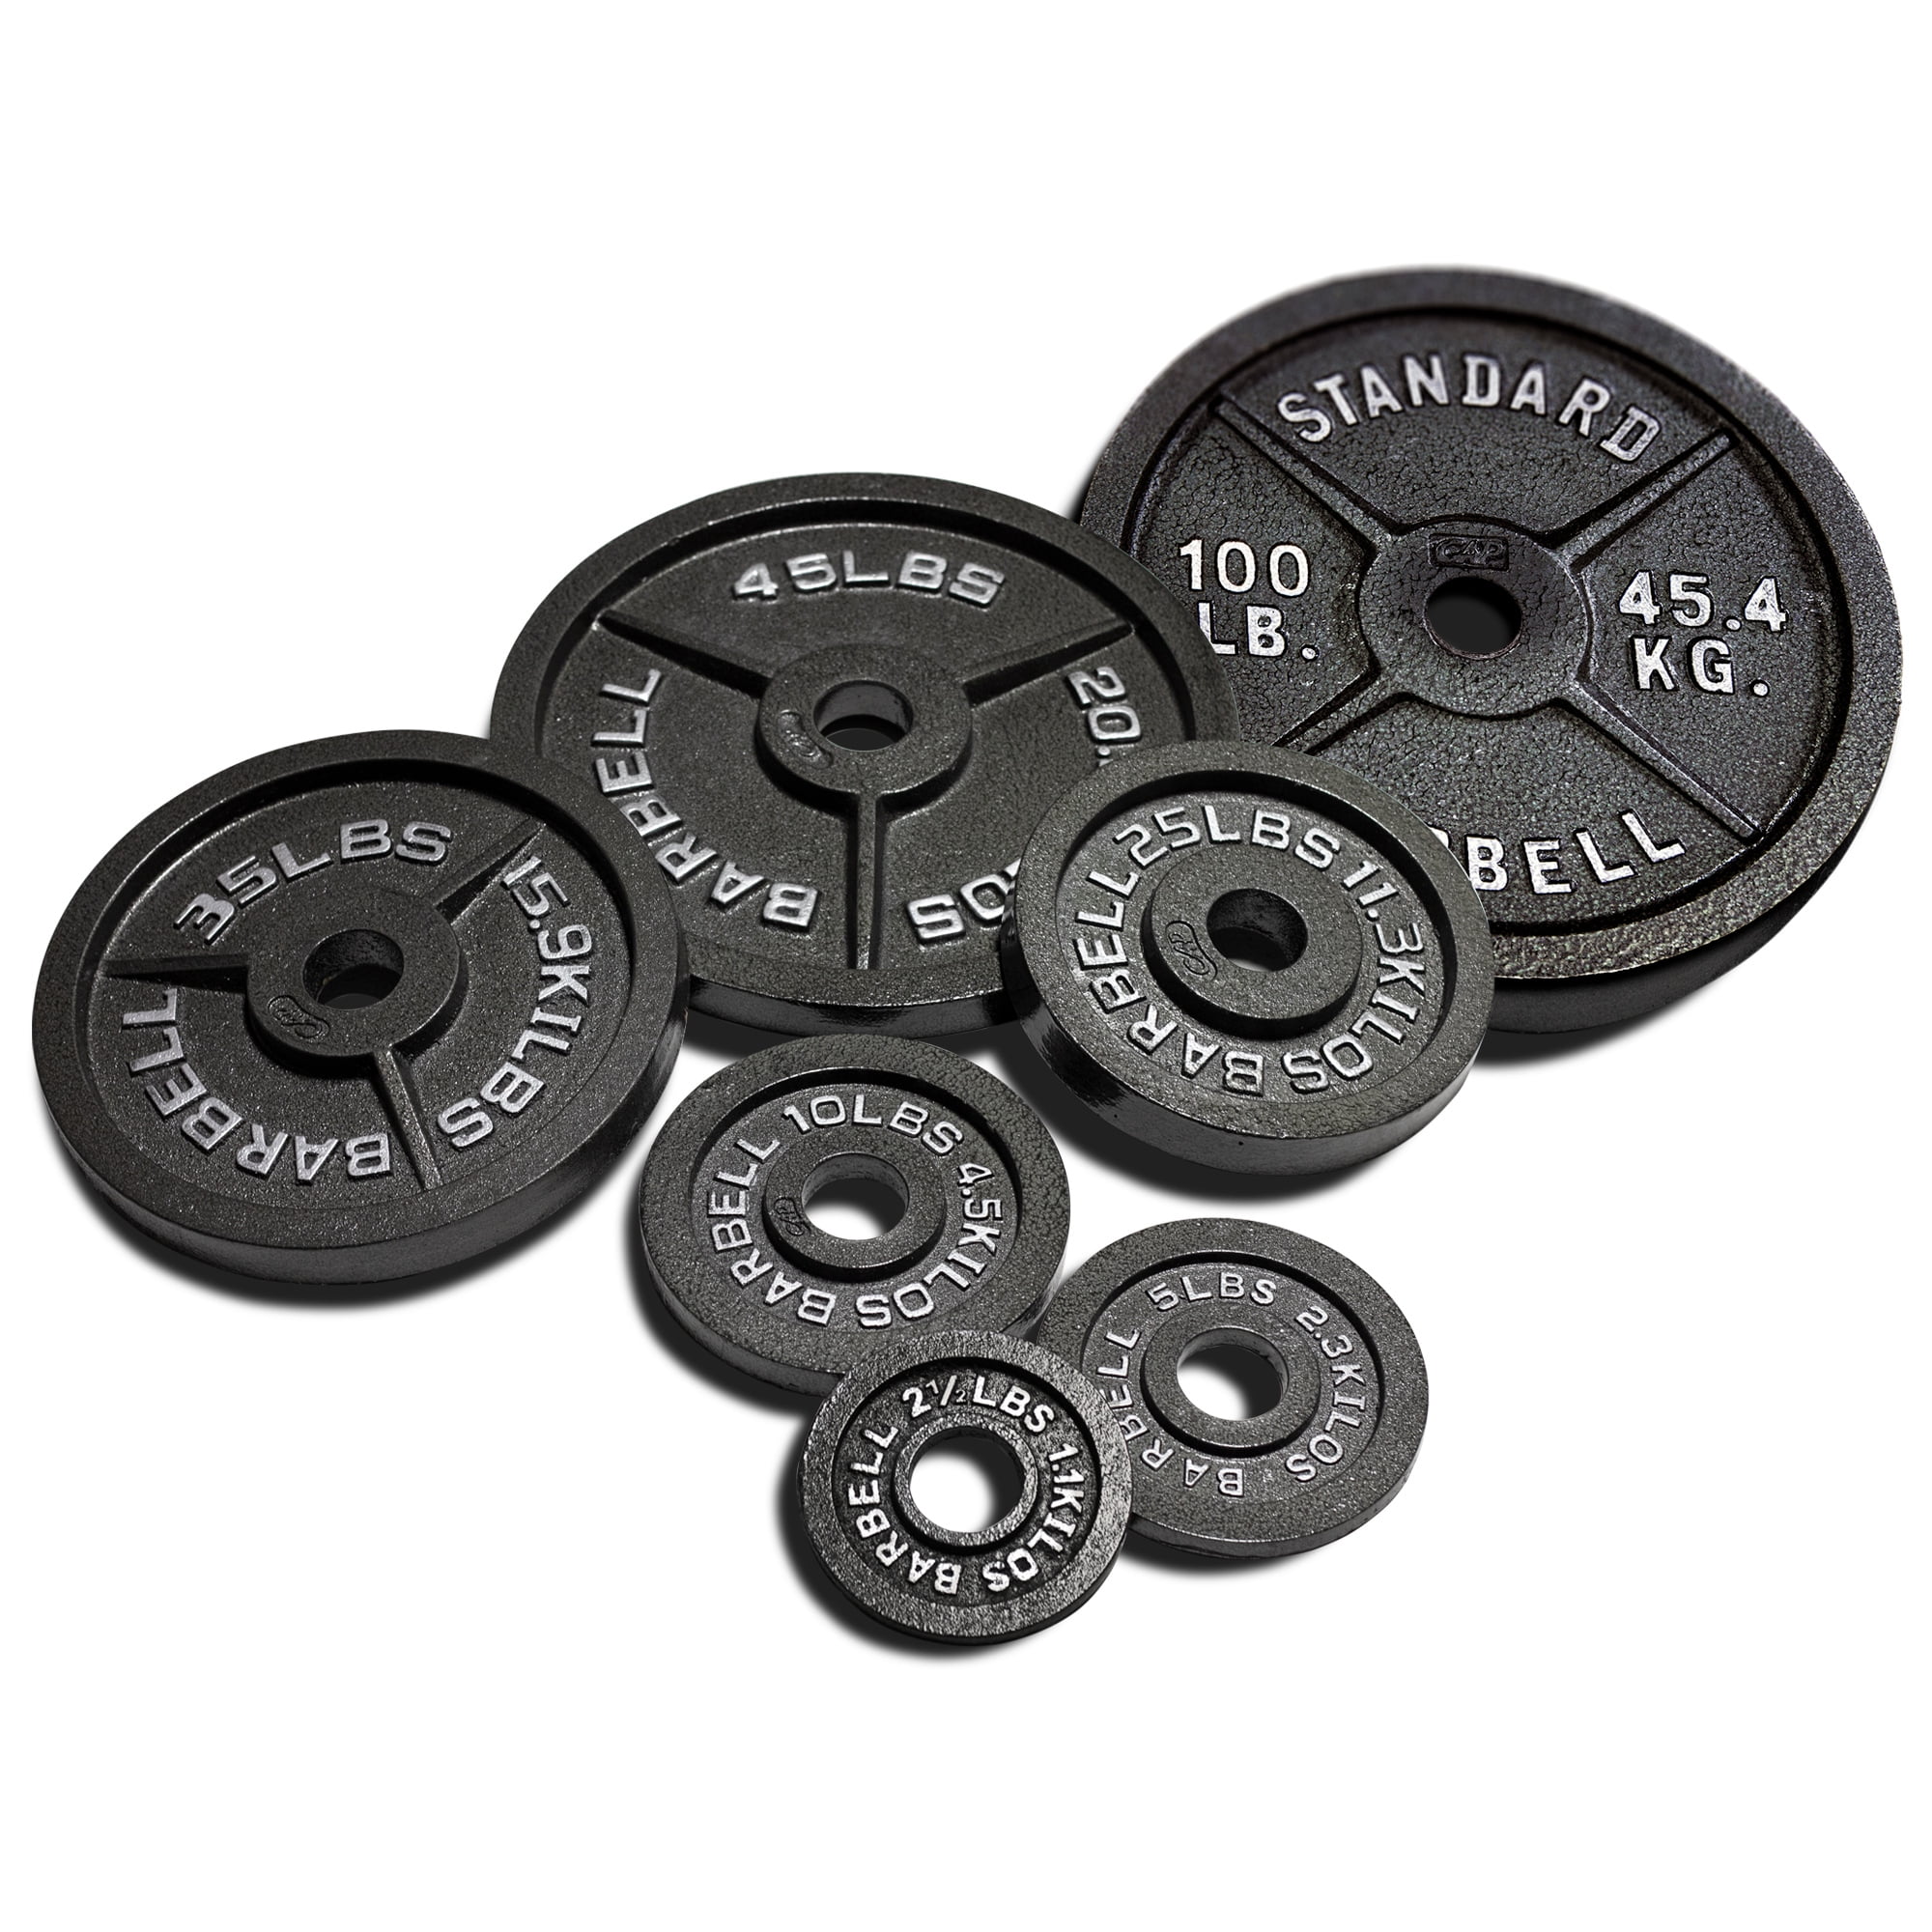 CAP Barbell 5lb Plates 1’’ Standard Weights Set of 4 20lb Total Free Shipping 